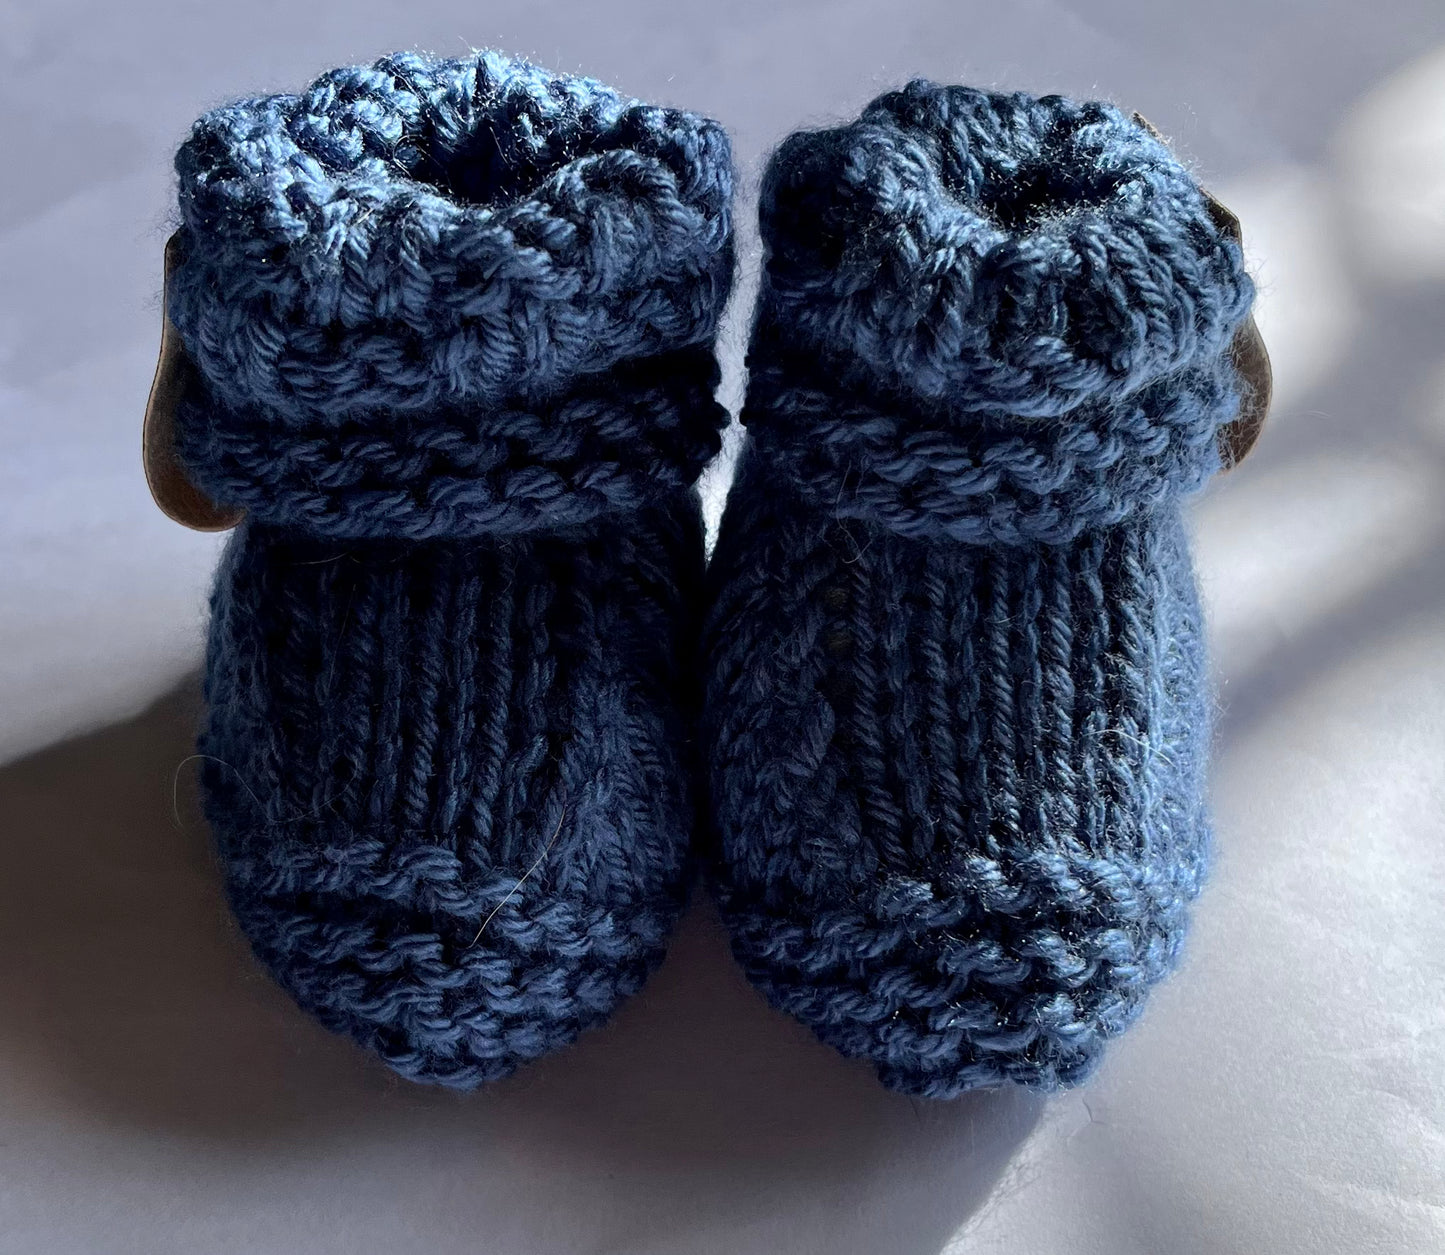 HAND KNITTED CARDIGAN & BOOTIE SET - NAVY